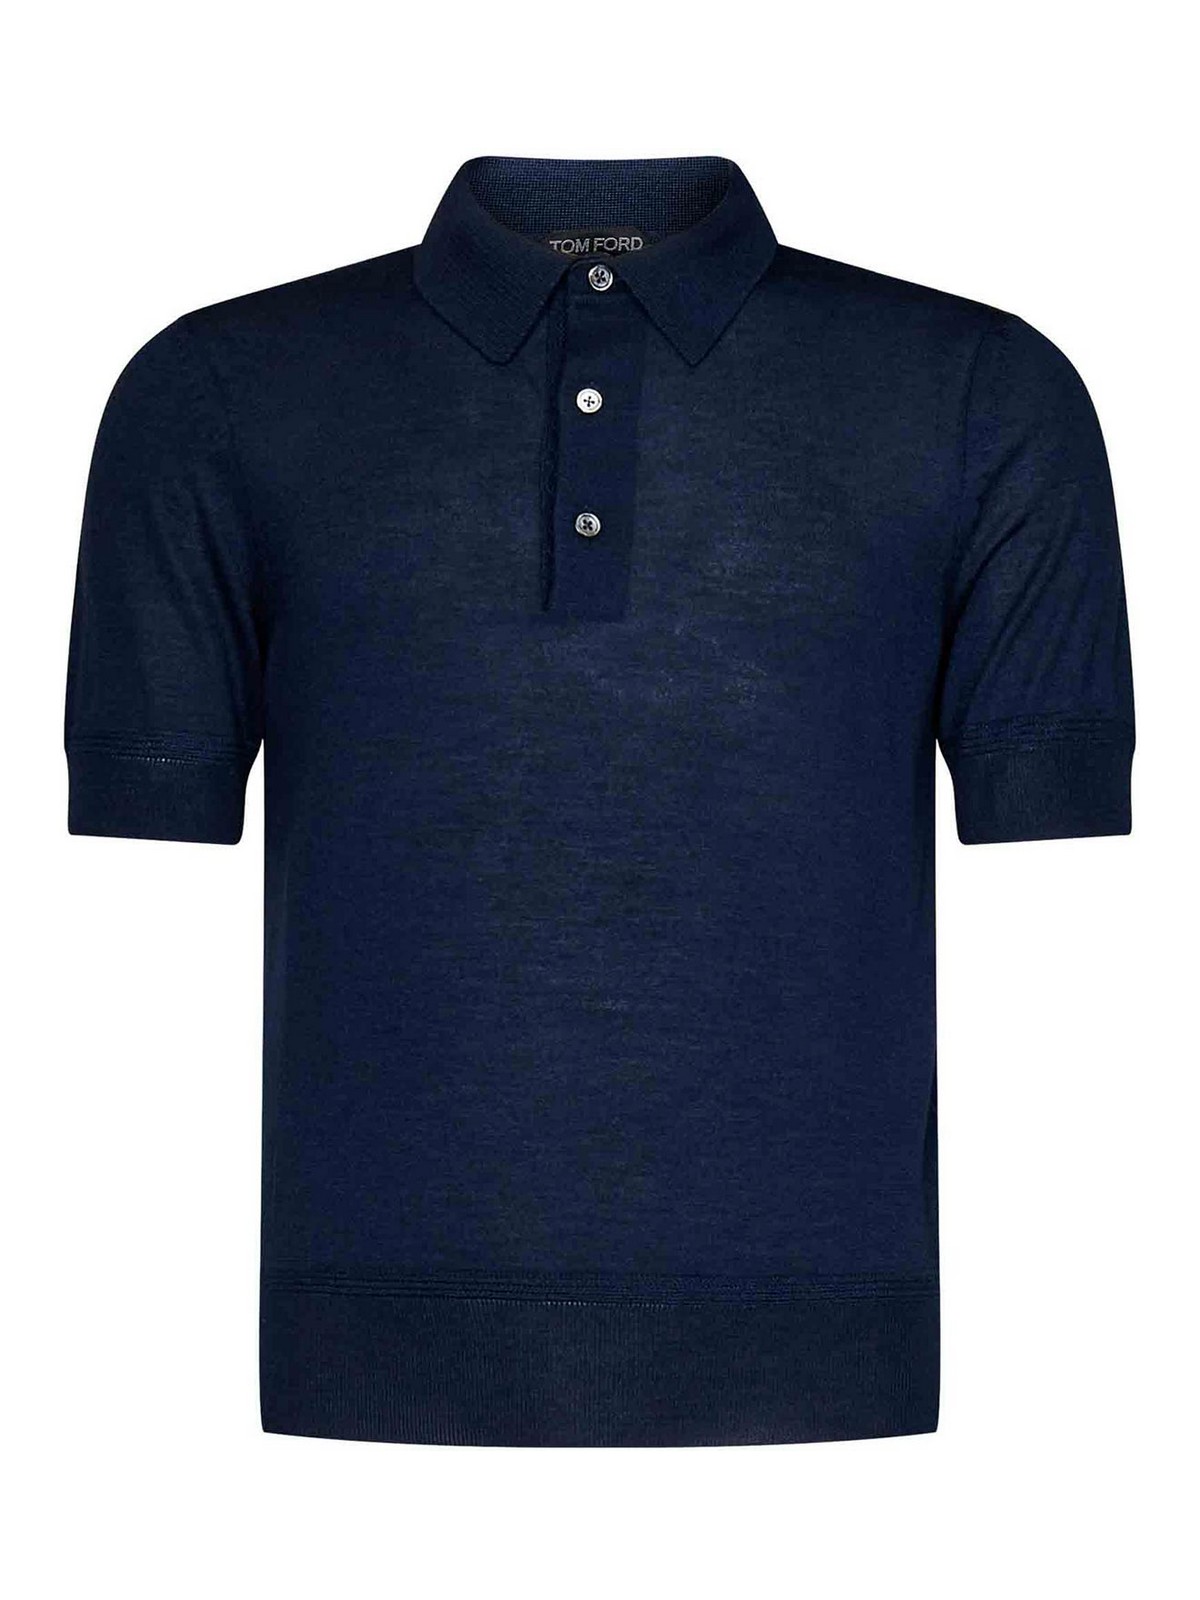 TOM FORD MIDNIGHT BLUE CASHMERE AND SILK POLO SHIRT